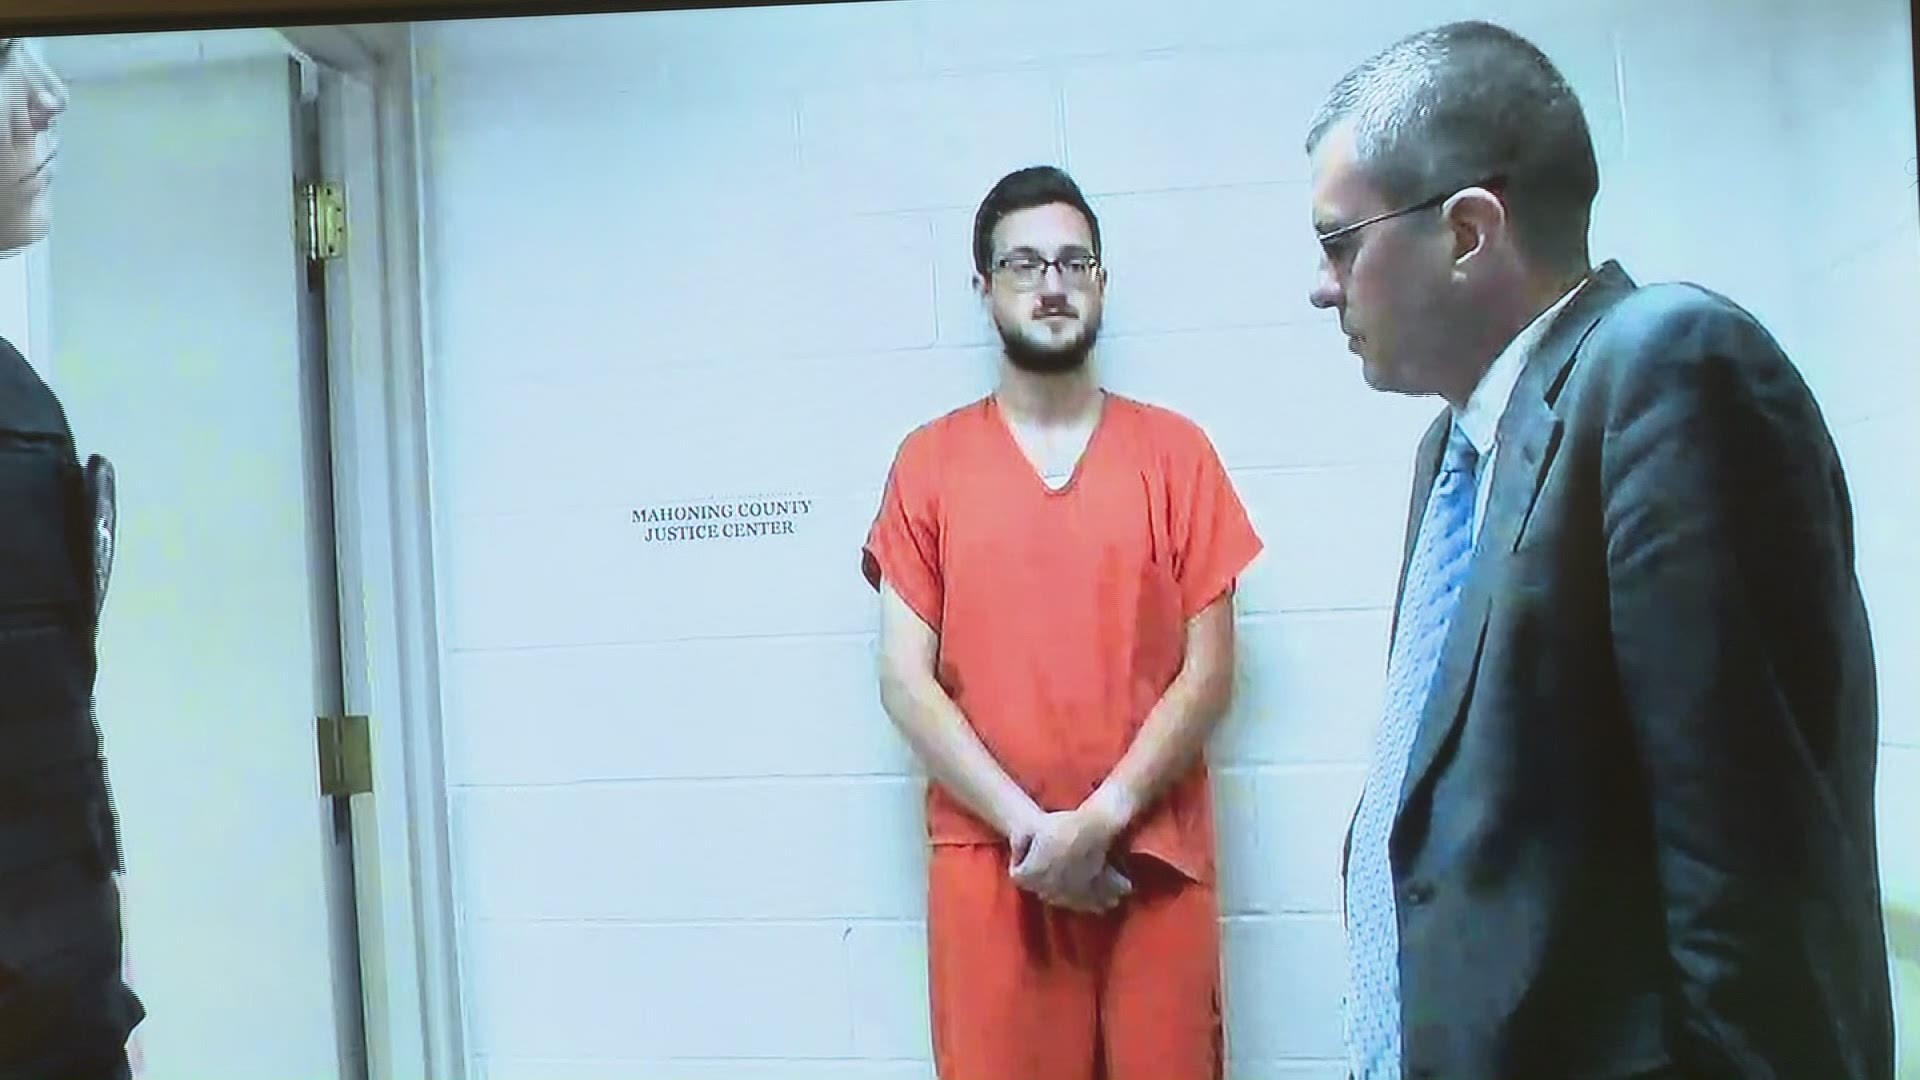 Attorneys for James Reardon entered pleas of not guilty on two counts. Bond was continued at $250,000. Reardon was also ordered to stay off of social media, not come within 500 feet of any Jewish center, and to undergo a mental health evaluation.